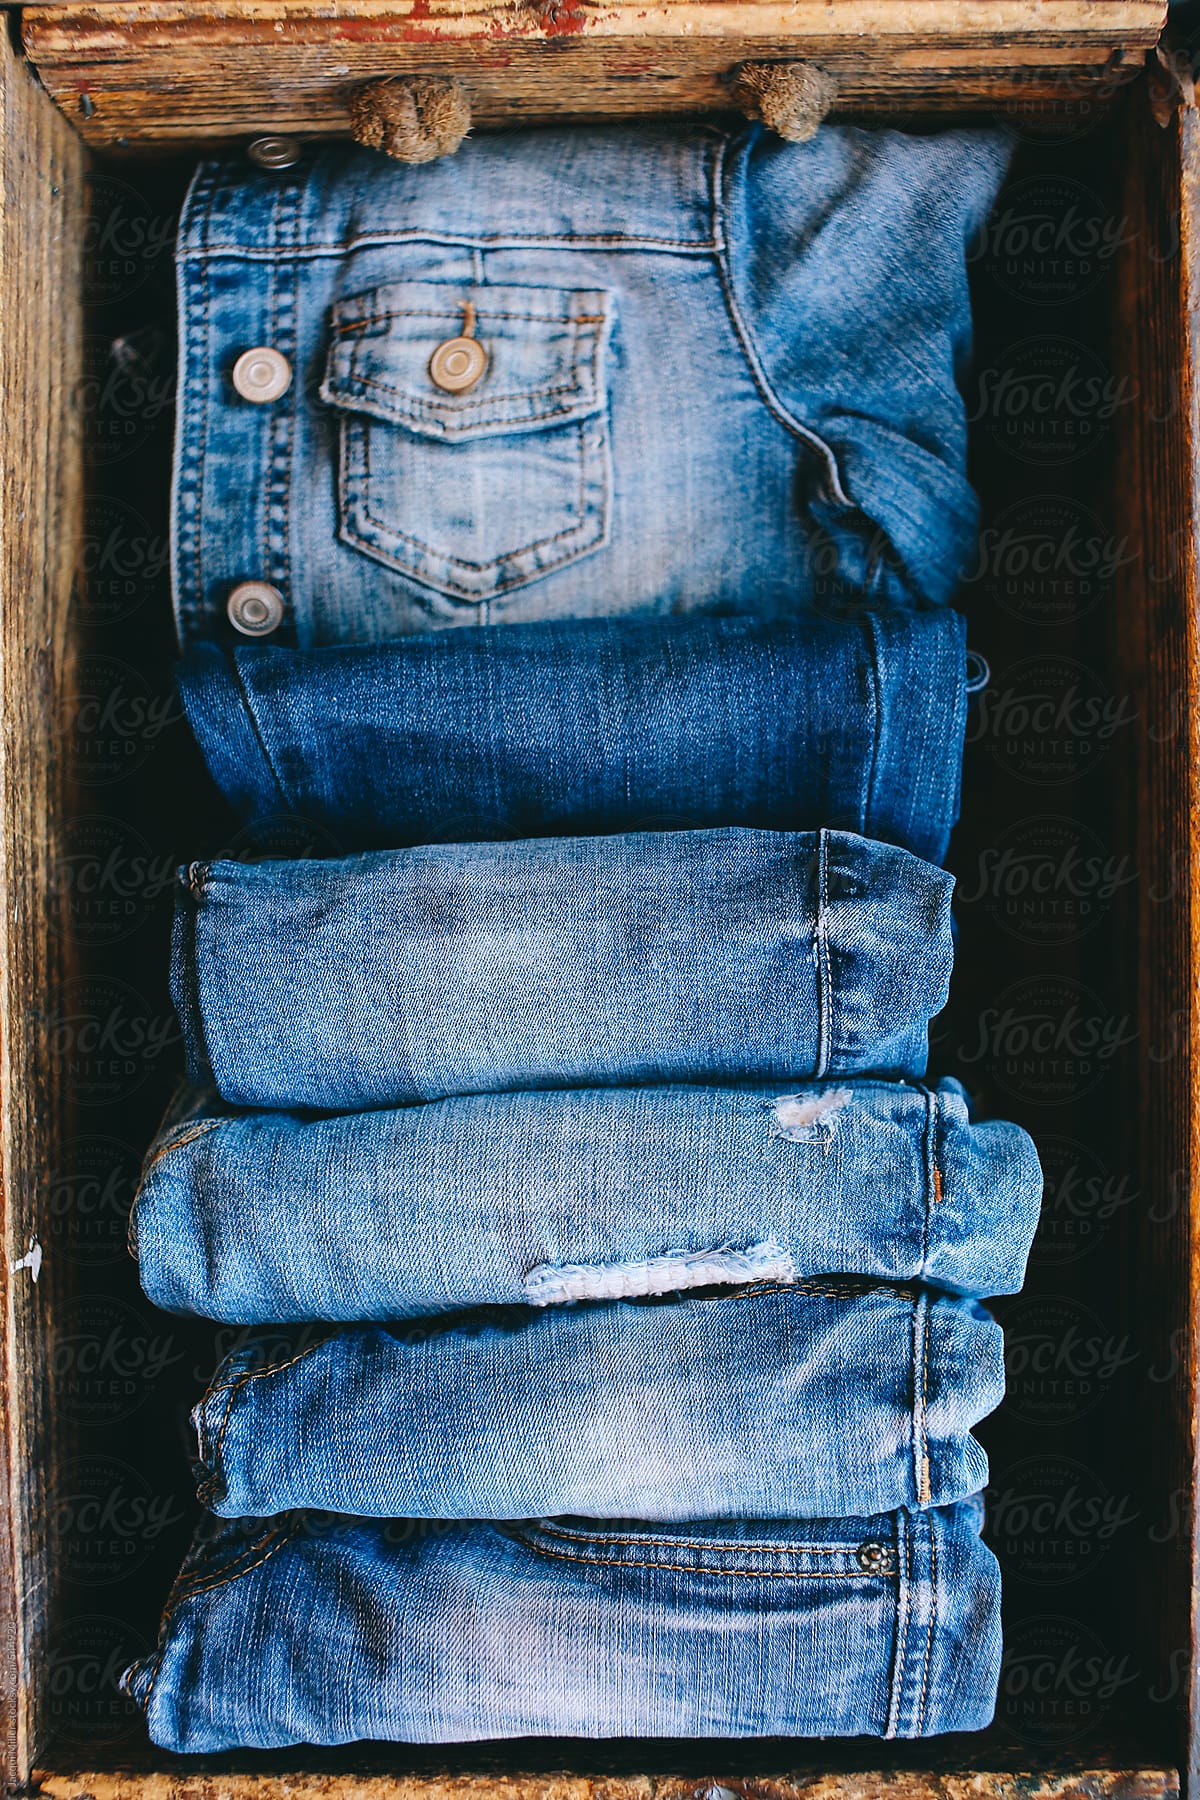 Selection of blue denim clothing in a wooden box